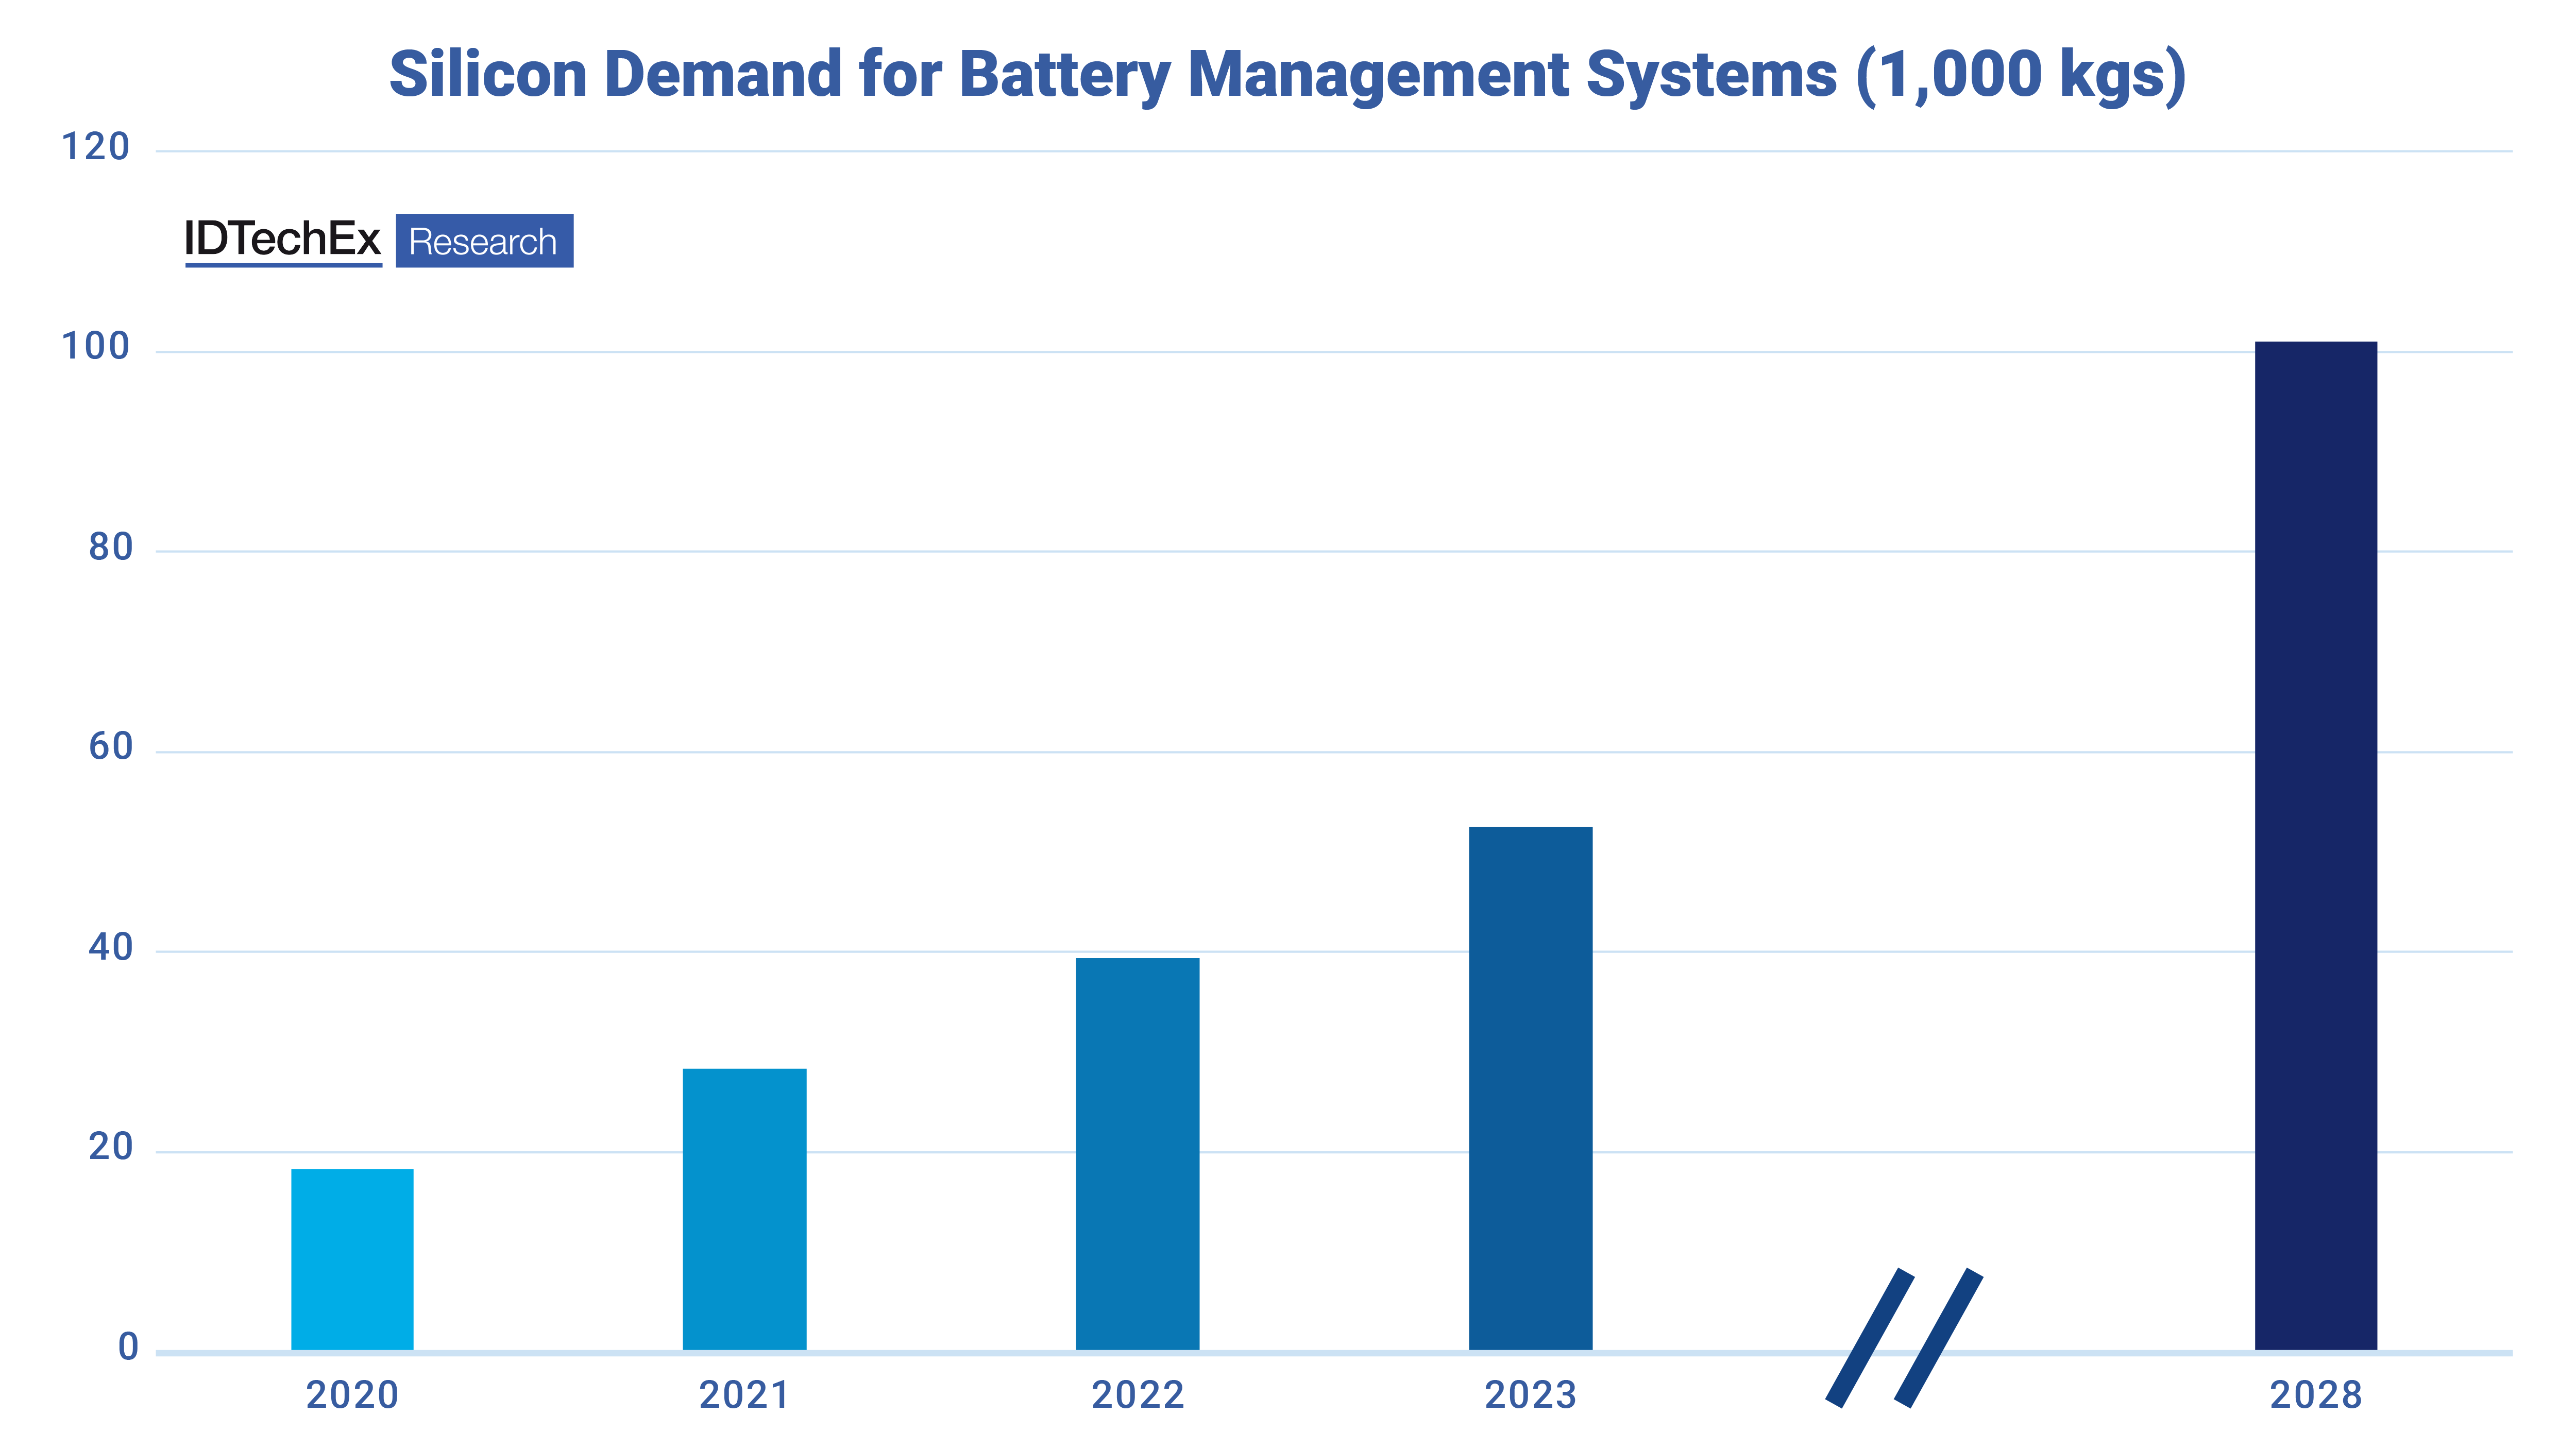 Silicon demand for battery management systems in electric vehicles. Source: IDTechEx